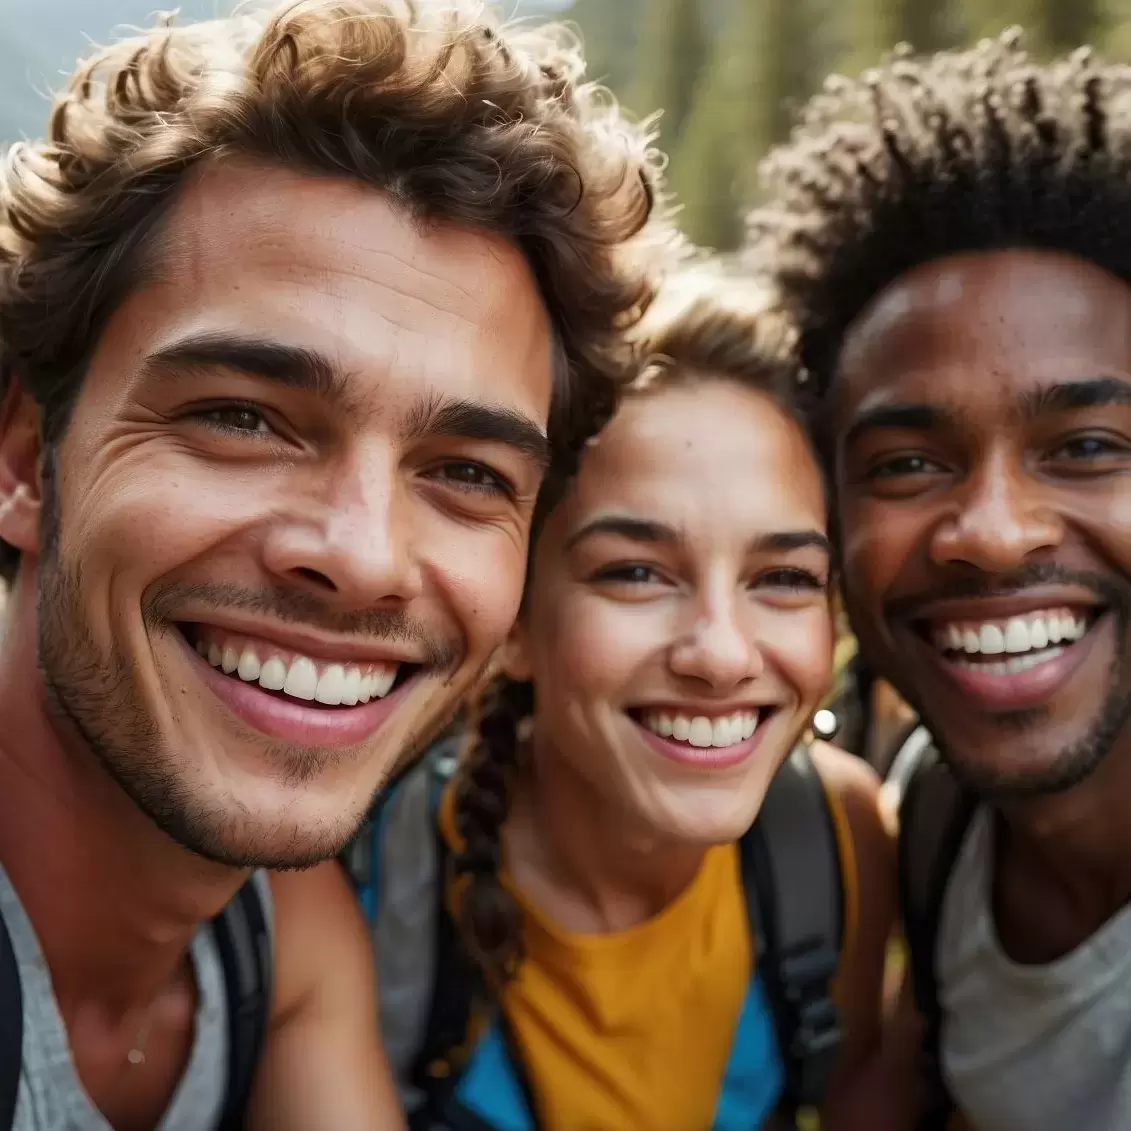 A group of hikers smiling for a selfie.